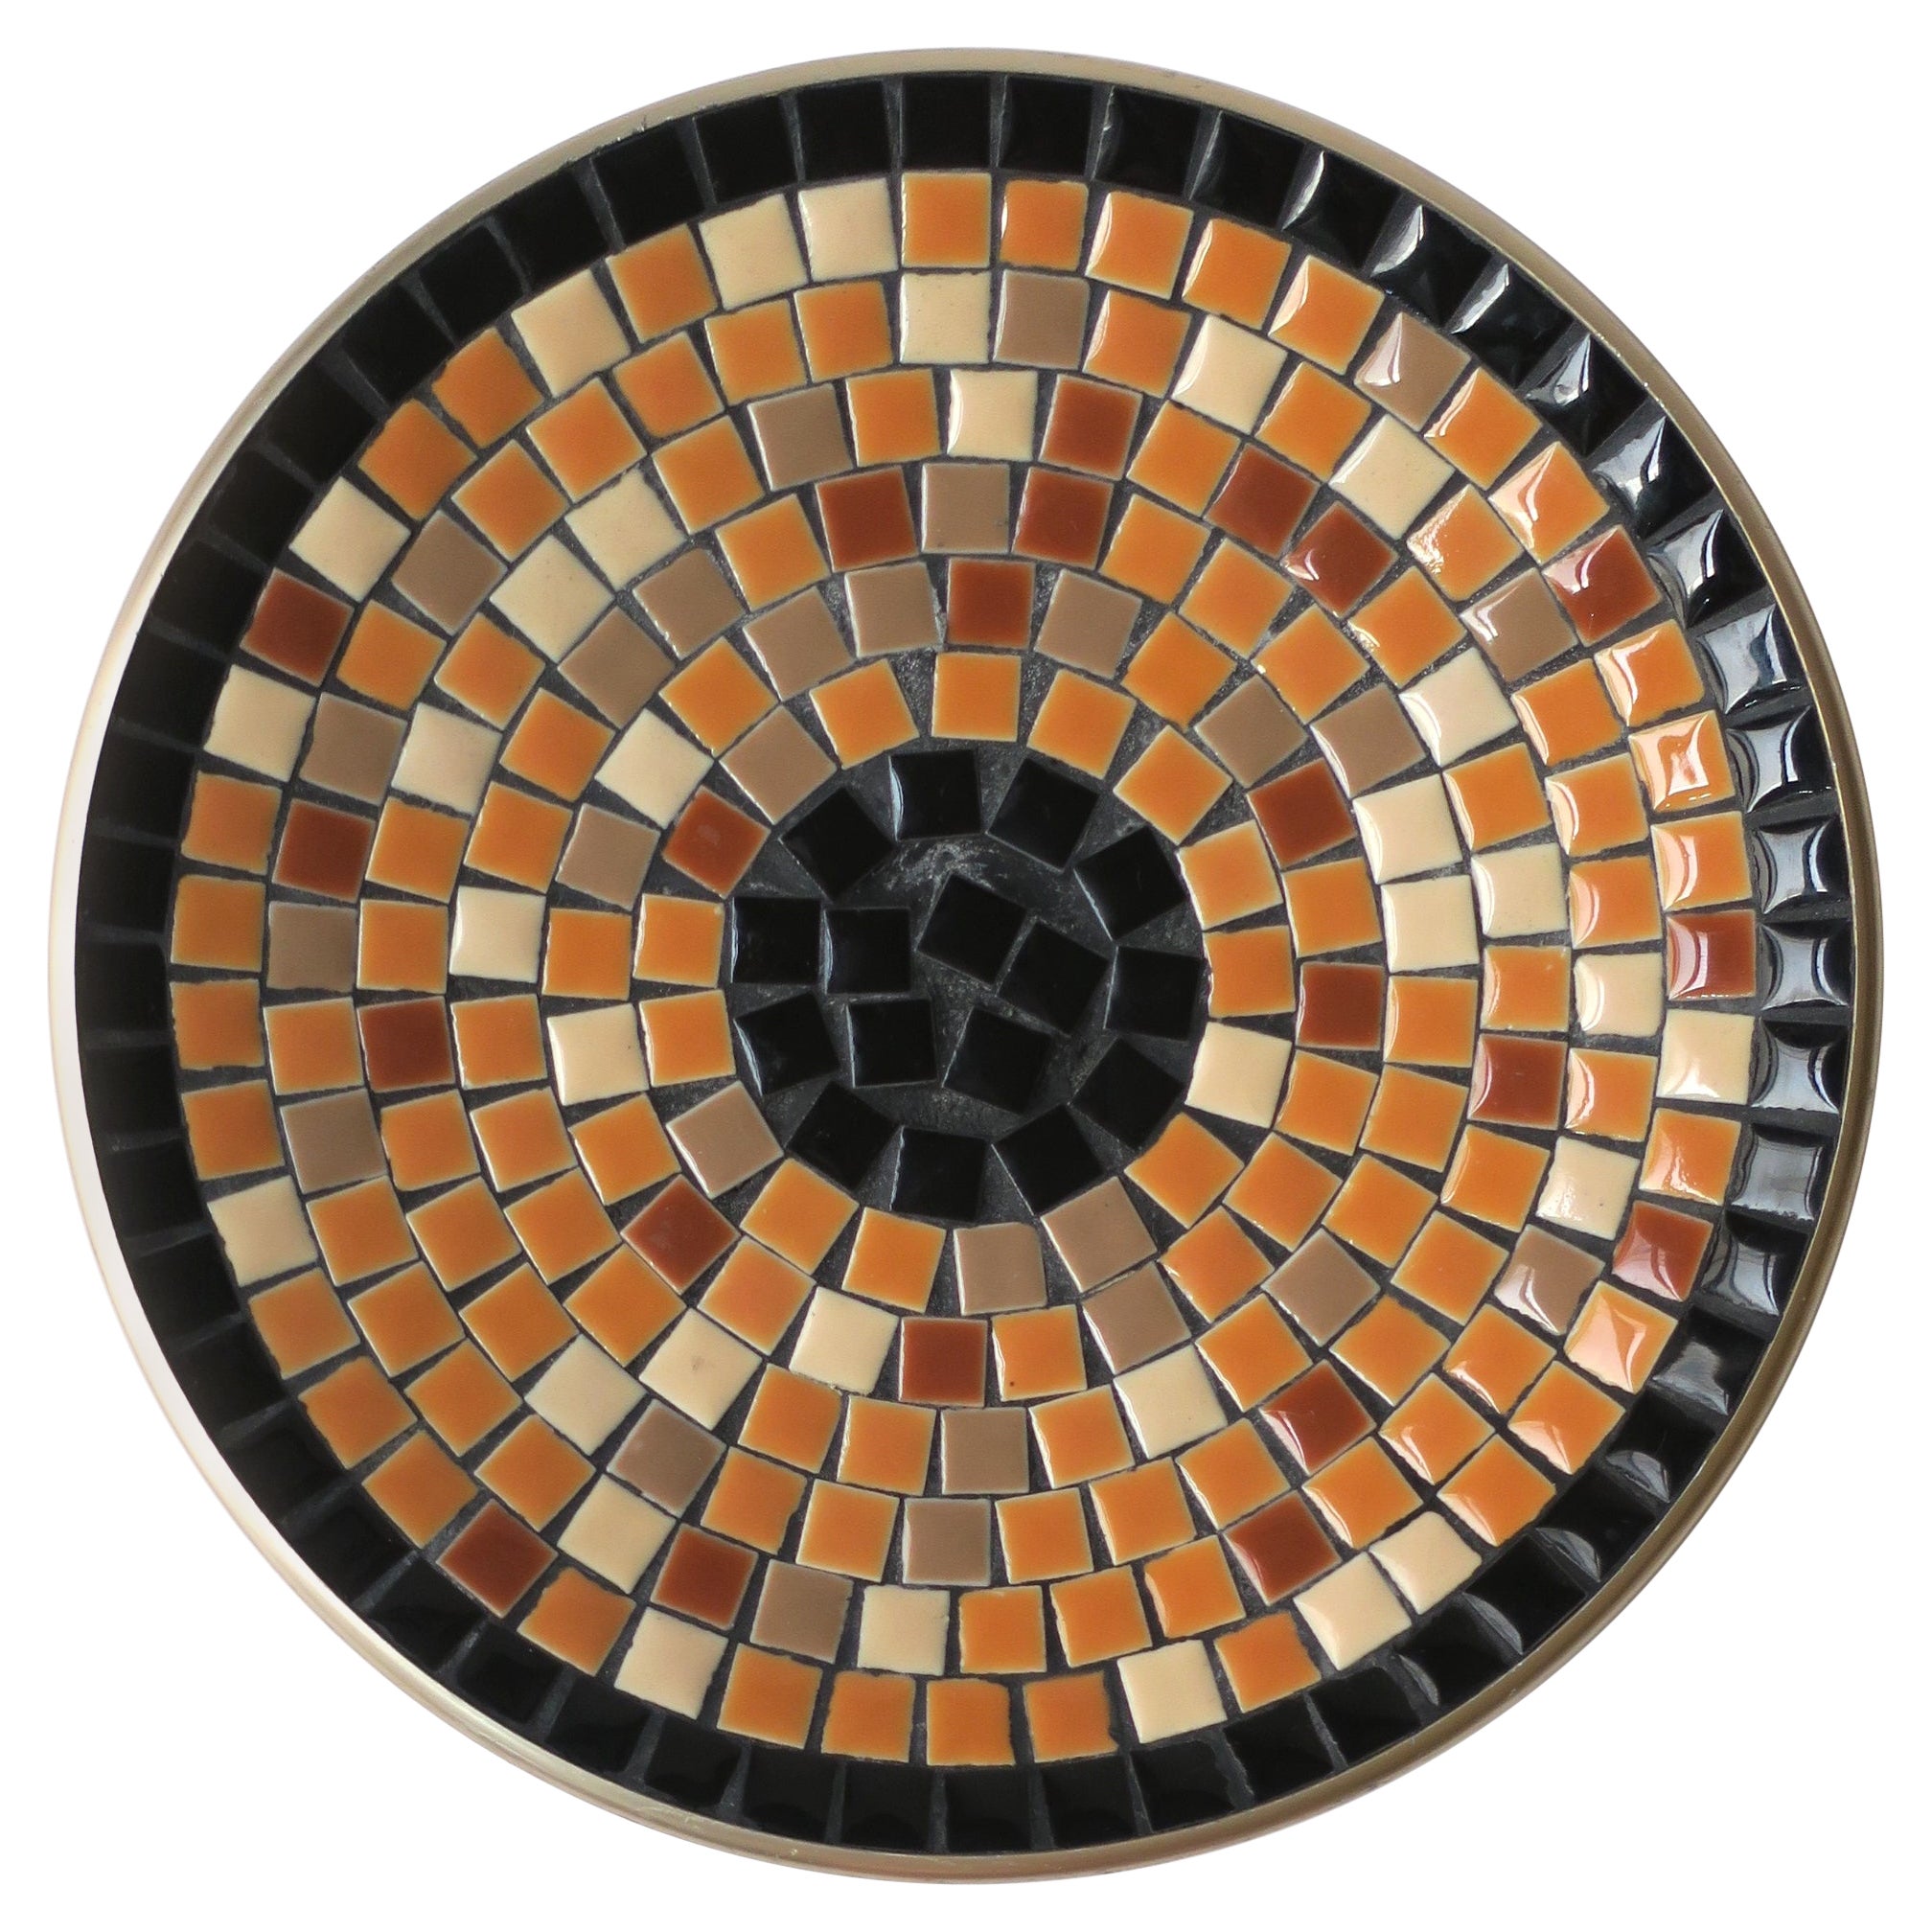 Mosaic Ceramic Tile Dish Vide-Poche Catchall Black and Terracotta, circa 1960s For Sale